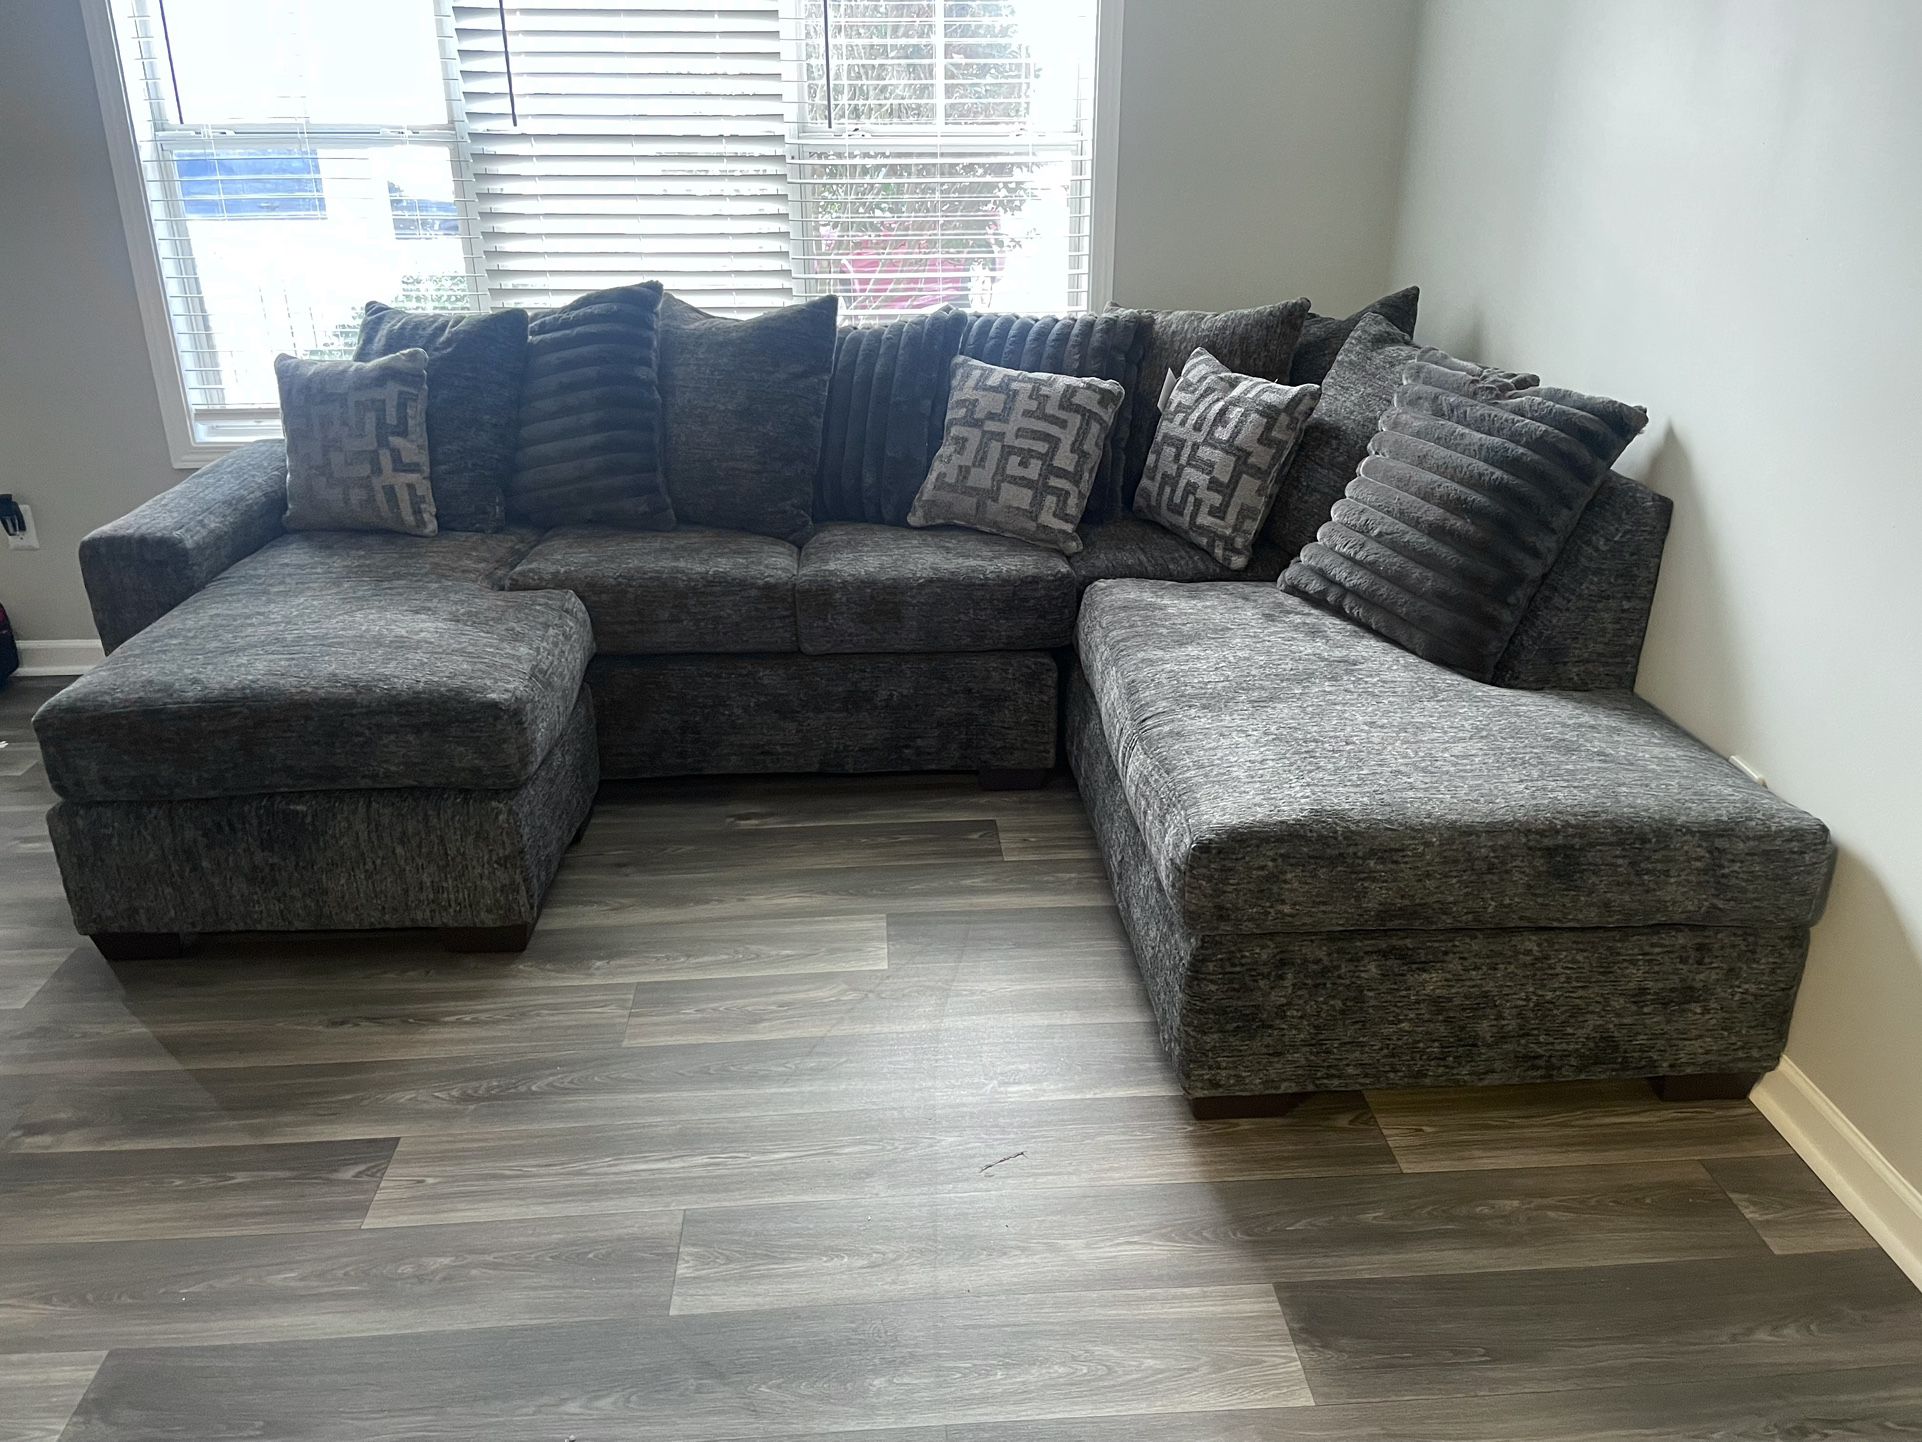  SMOKE GRAY & PEPPER BLACK OVERSIZED SUPER COMFY SECTIONAL WITH 12 THROW PILLOWS!! $975 WITH DELIVERY!!